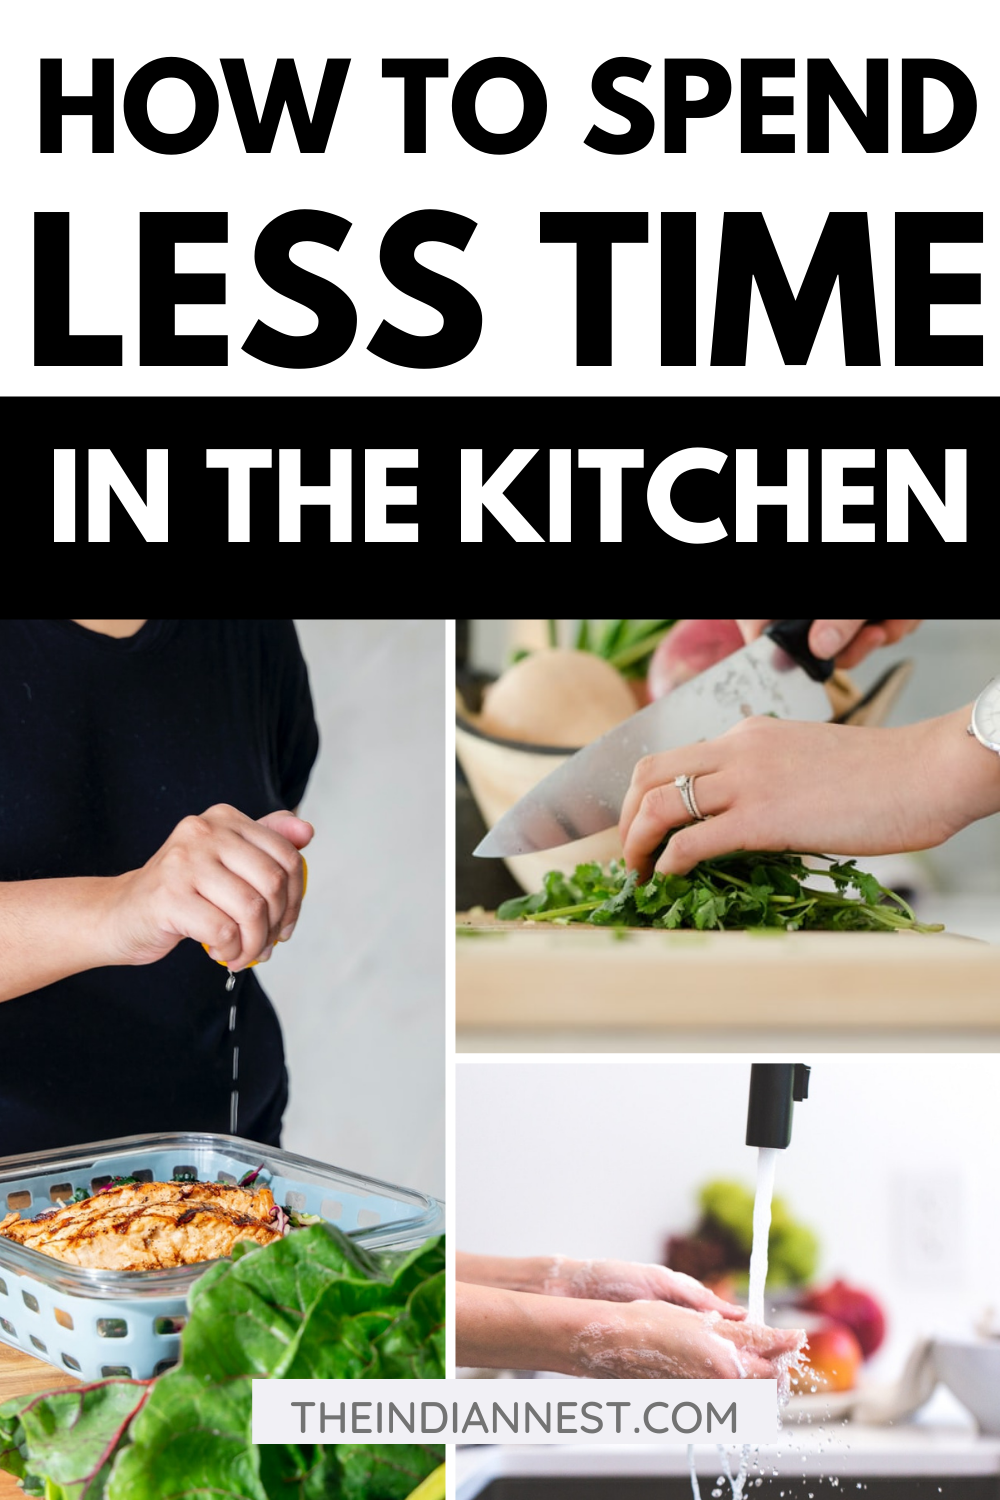 How can you reduce time spent in kitchen? How can I make my kitchen work faster? How To Efficiently Manage Time In Kitchen?  Getting organised in the kitchen is a very tangible way to save time each and every day. It will save time for cooking, cleaning etc.  You can save a total of two and a half hours by using all these tips. Here you have 9 Time-Saving Kitchen Hacks That Will Change Your Life!